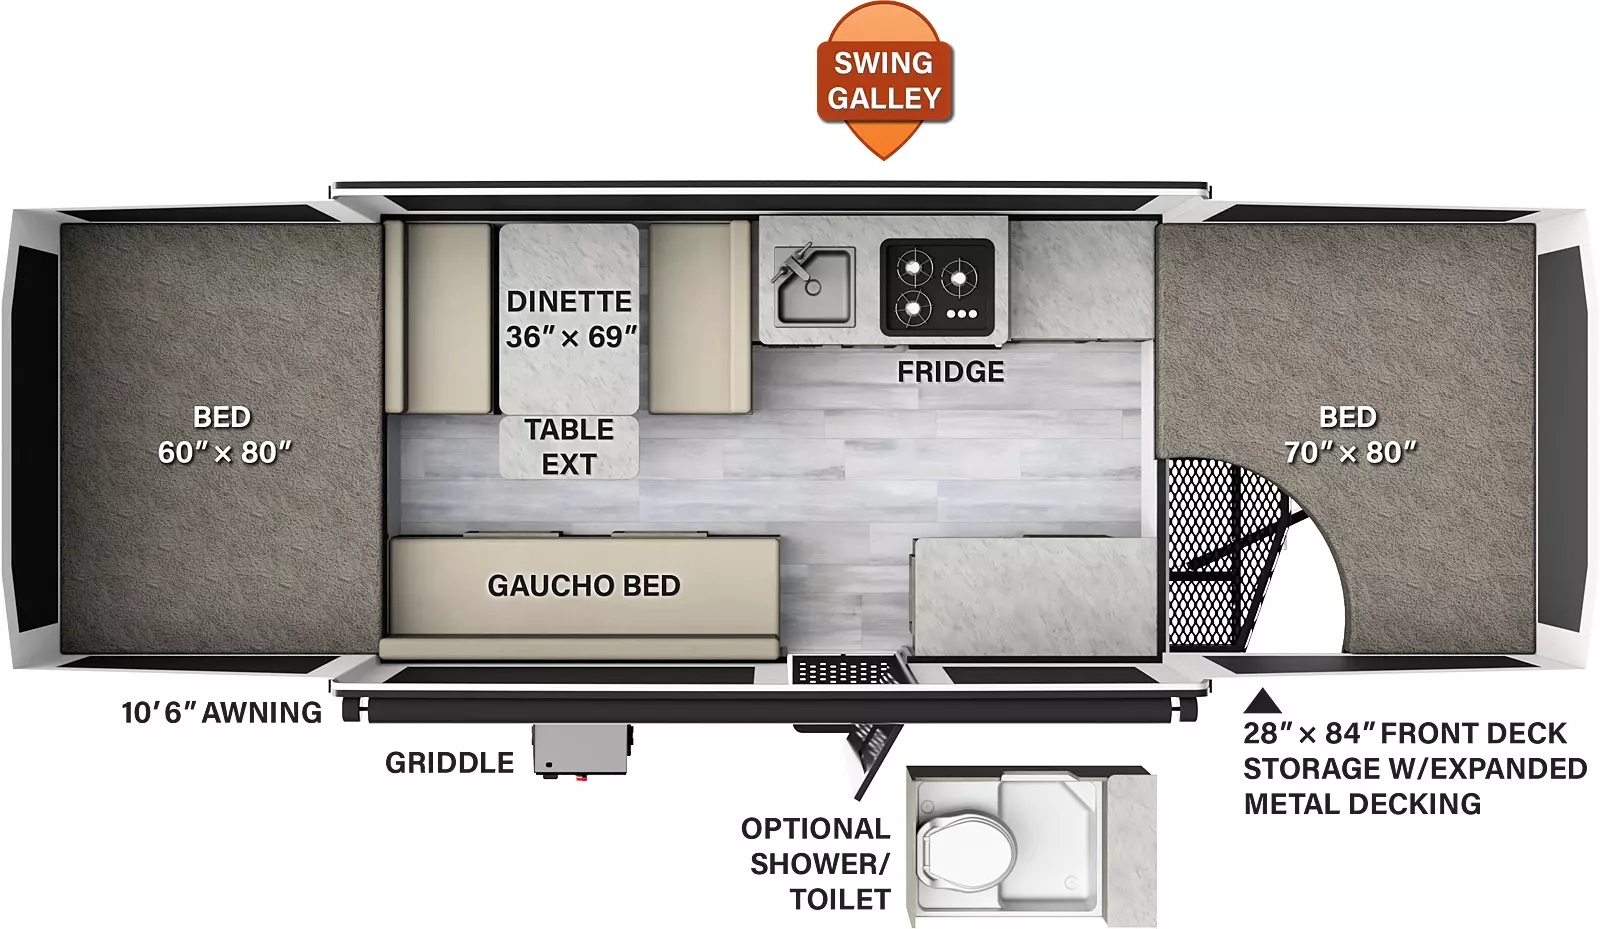 The 2280BHESP has no slide outs and one entry door. Exterior features include a 10 foot 6 inch awning, griddle, and front deck storage with expanded metal decking. Interior layout from front to back: front tent bed; off-door side countertop, swing galley with cooktop, sink and refrigerator, and dinette with table extension; door side countertop, entry, and gaucho bed; rear tent bed. Optional shower/toilet available.